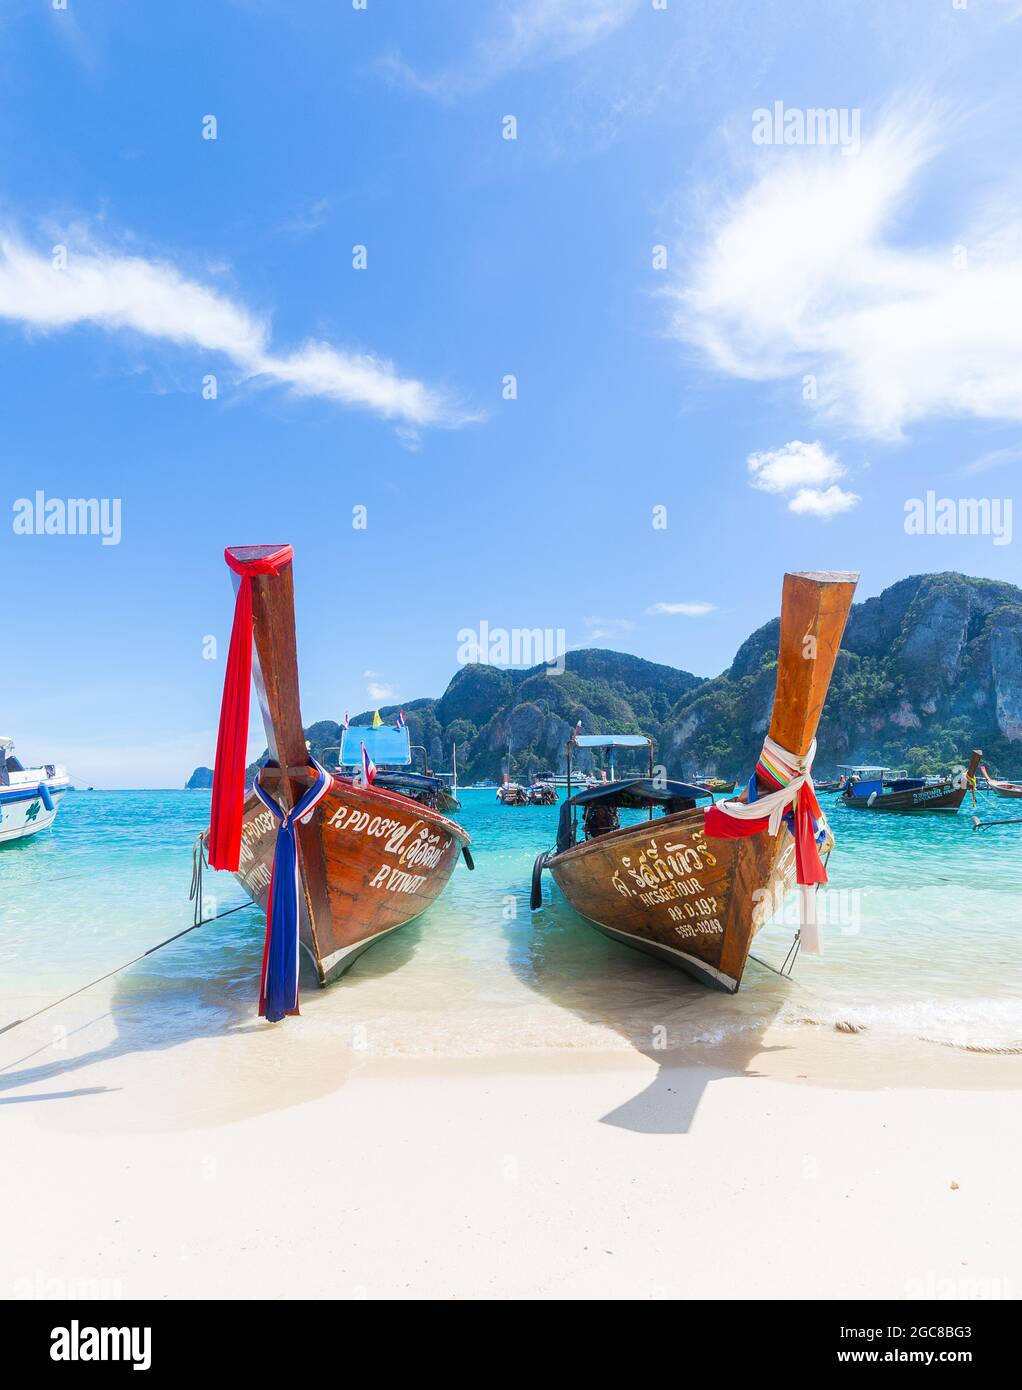 KO PHI PHI DON, THAILAND - 31ST MARCH 2017: Typical long-tail boats on the beaches in Ko Phi Phi Thailand Stock Photo